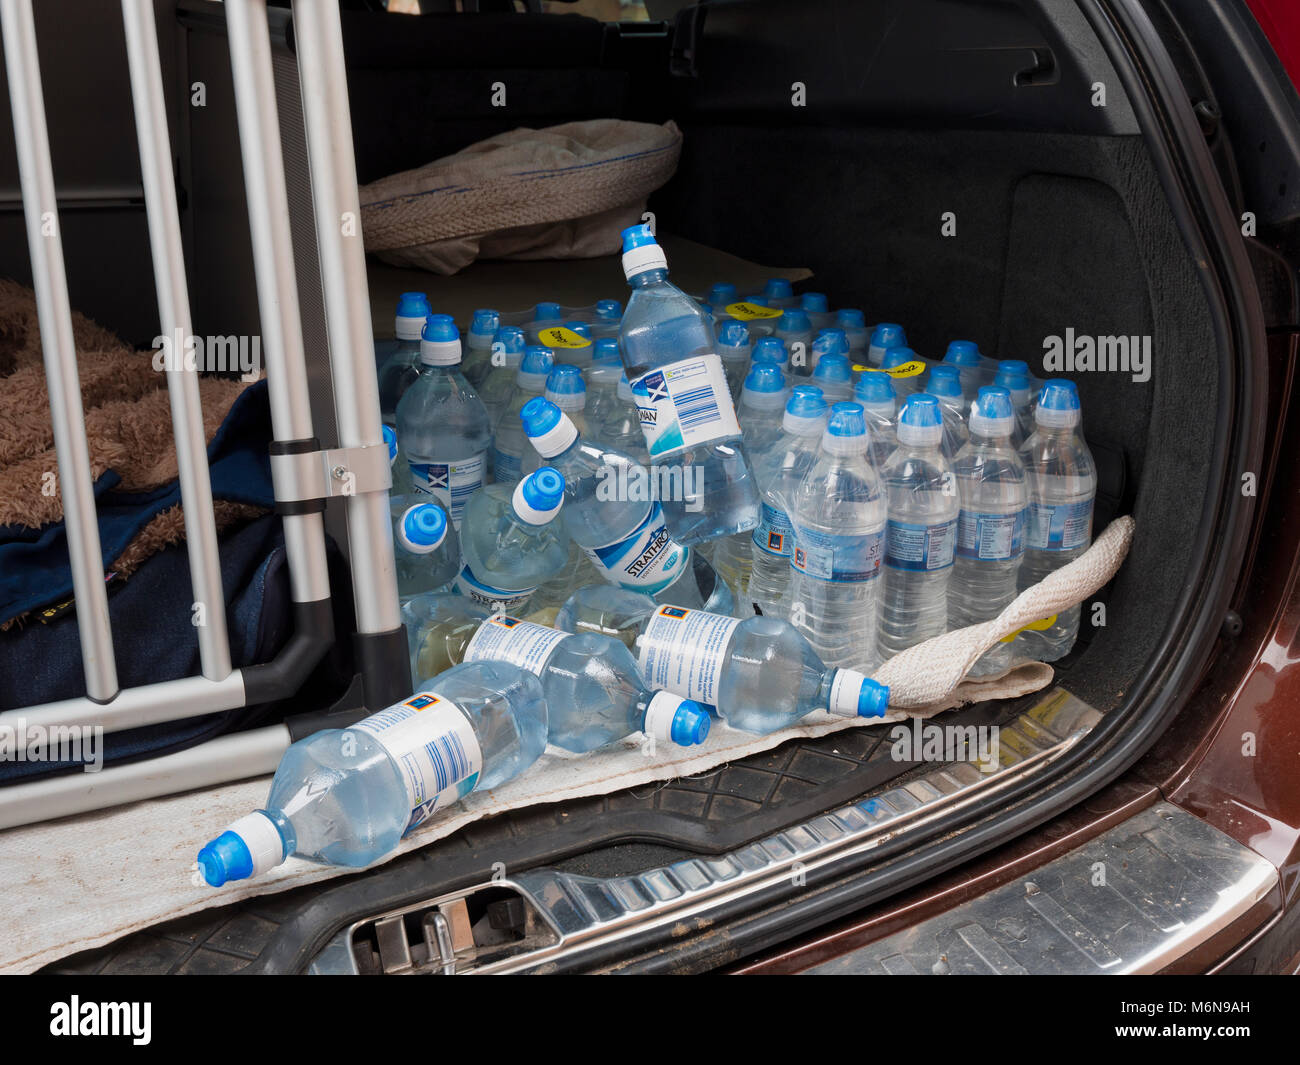 Ashbourne, UK. 5th March, 2018. 5th Mar, 2018. UK Weather; People in Ashbourne stockpile bottled water from Aldi as the supermarkets run out of bottled water due to a burst mans pipe on the Severn Trent Water supply. Credit: Doug Blane/Alamy Live News Credit: Doug Blane/Alamy Live News Stock Photo